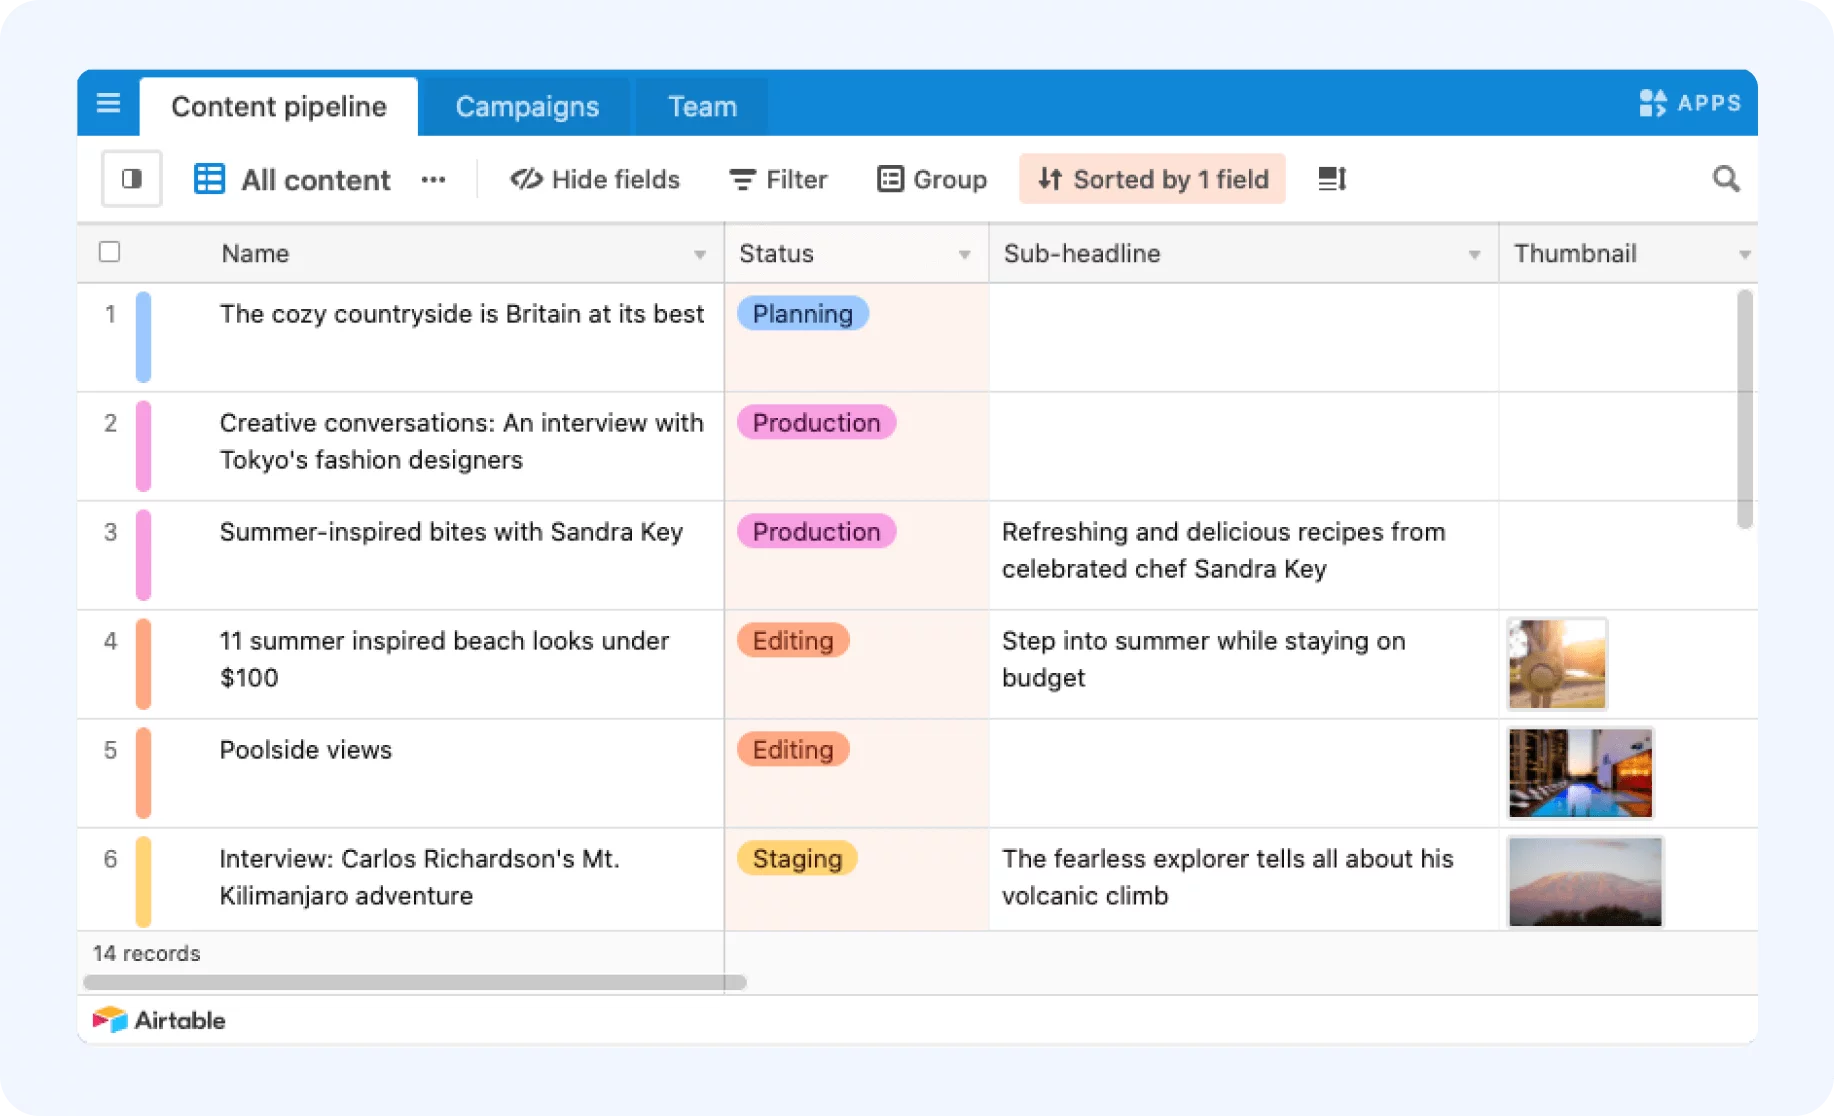 Content pipeline organization in Airtable with fields such as Name, Status, Sub-headline and Thumbnail.